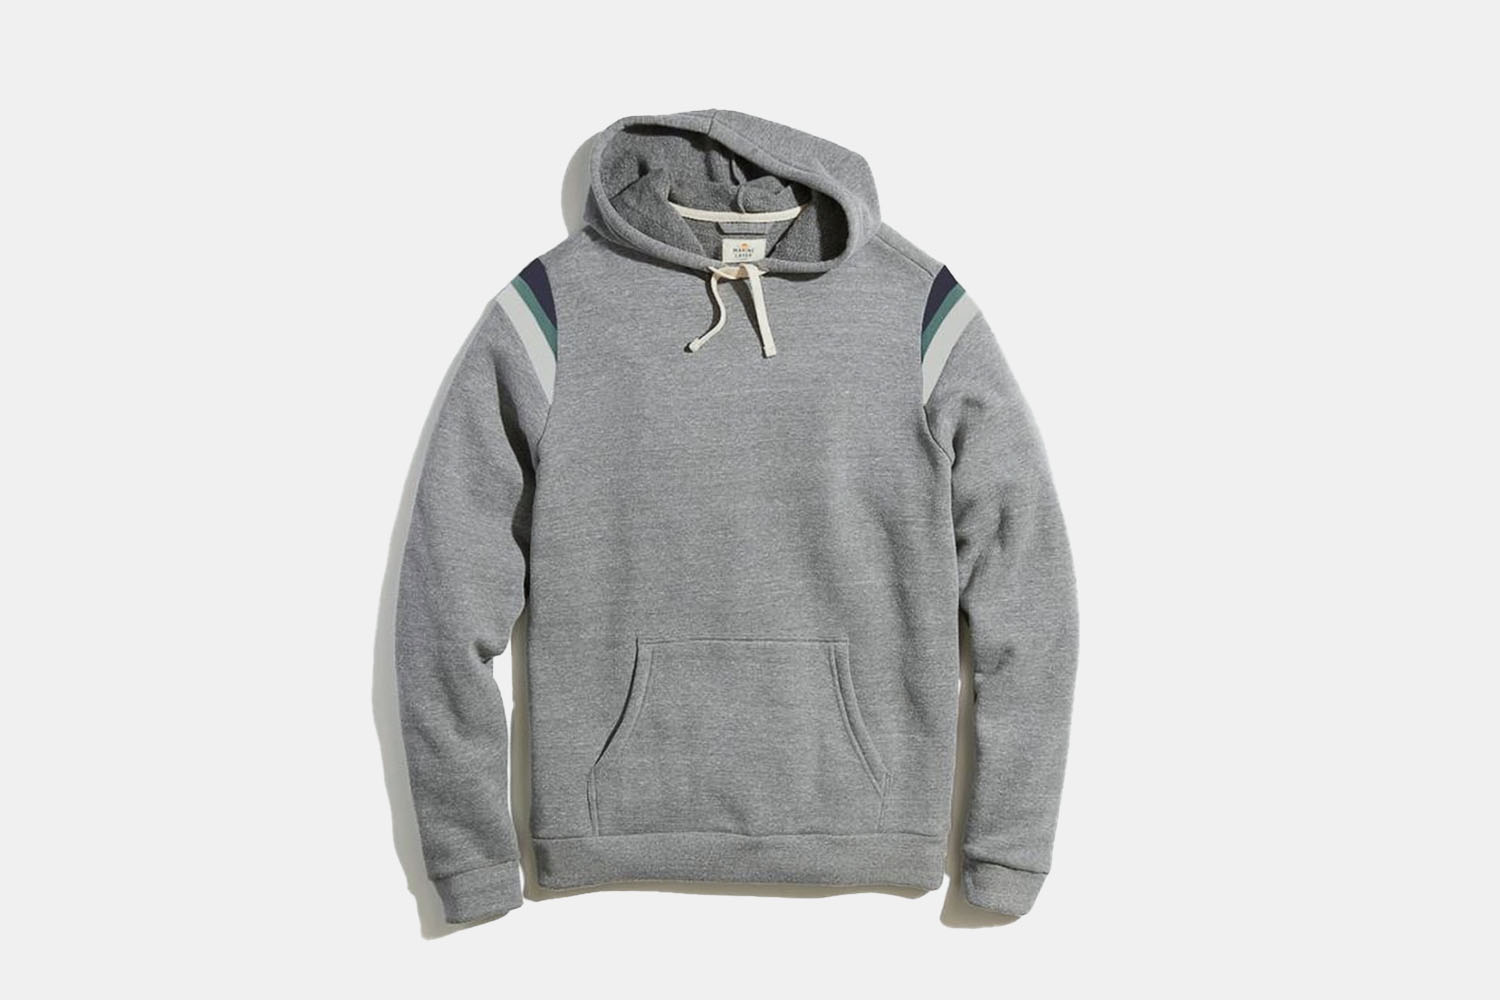 a grey hoodie with shoulder detailing